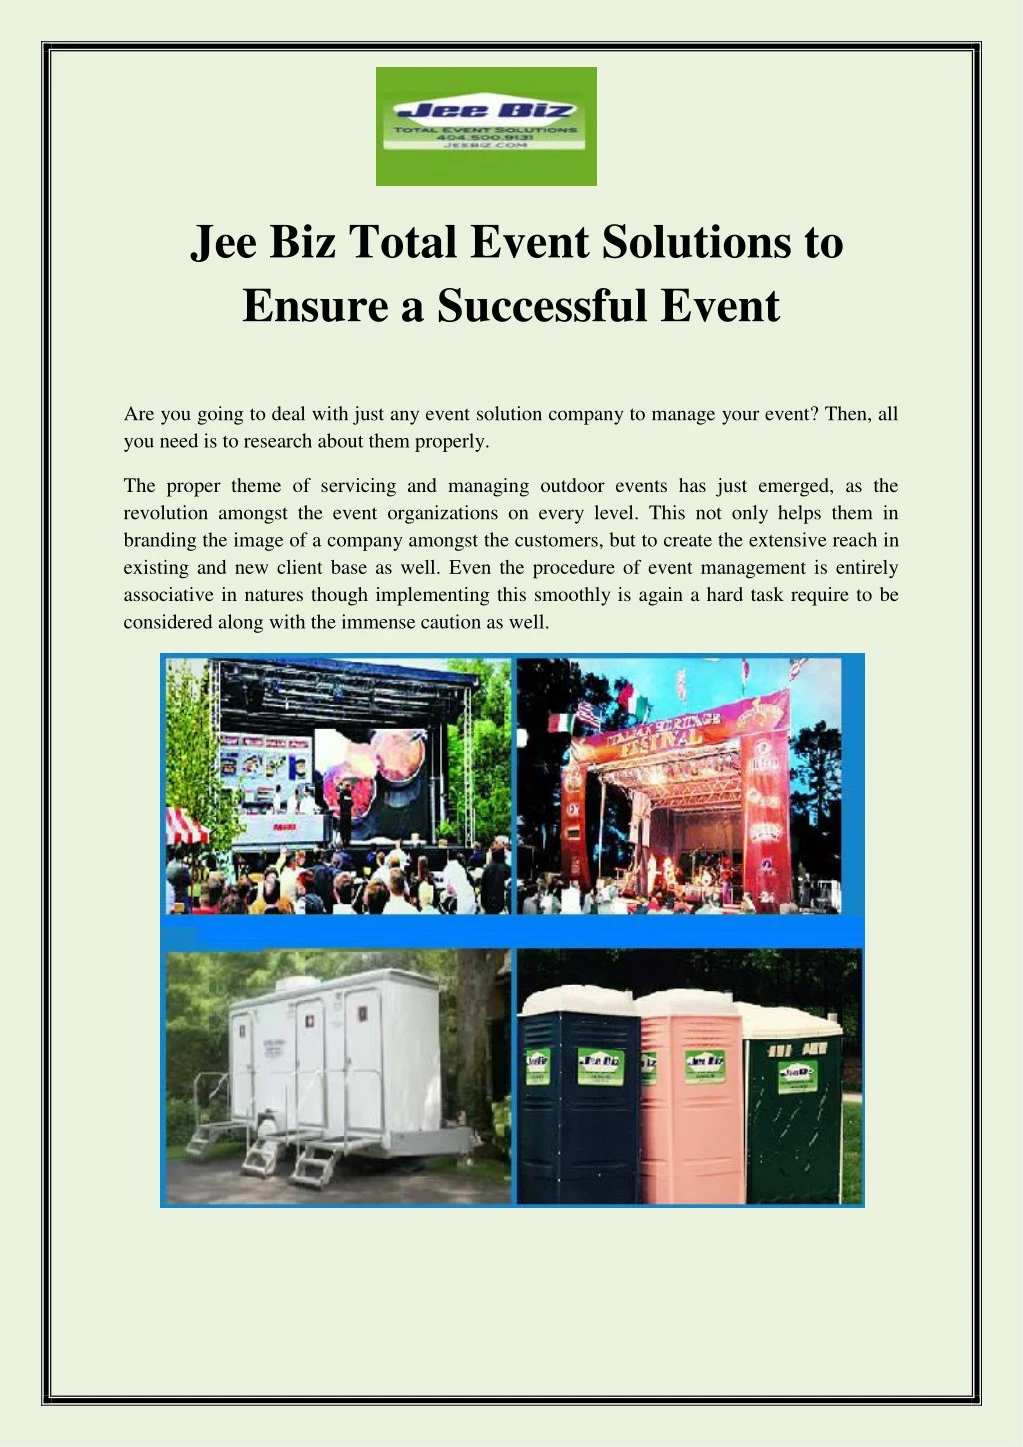 jee biz total event solutions to ensure